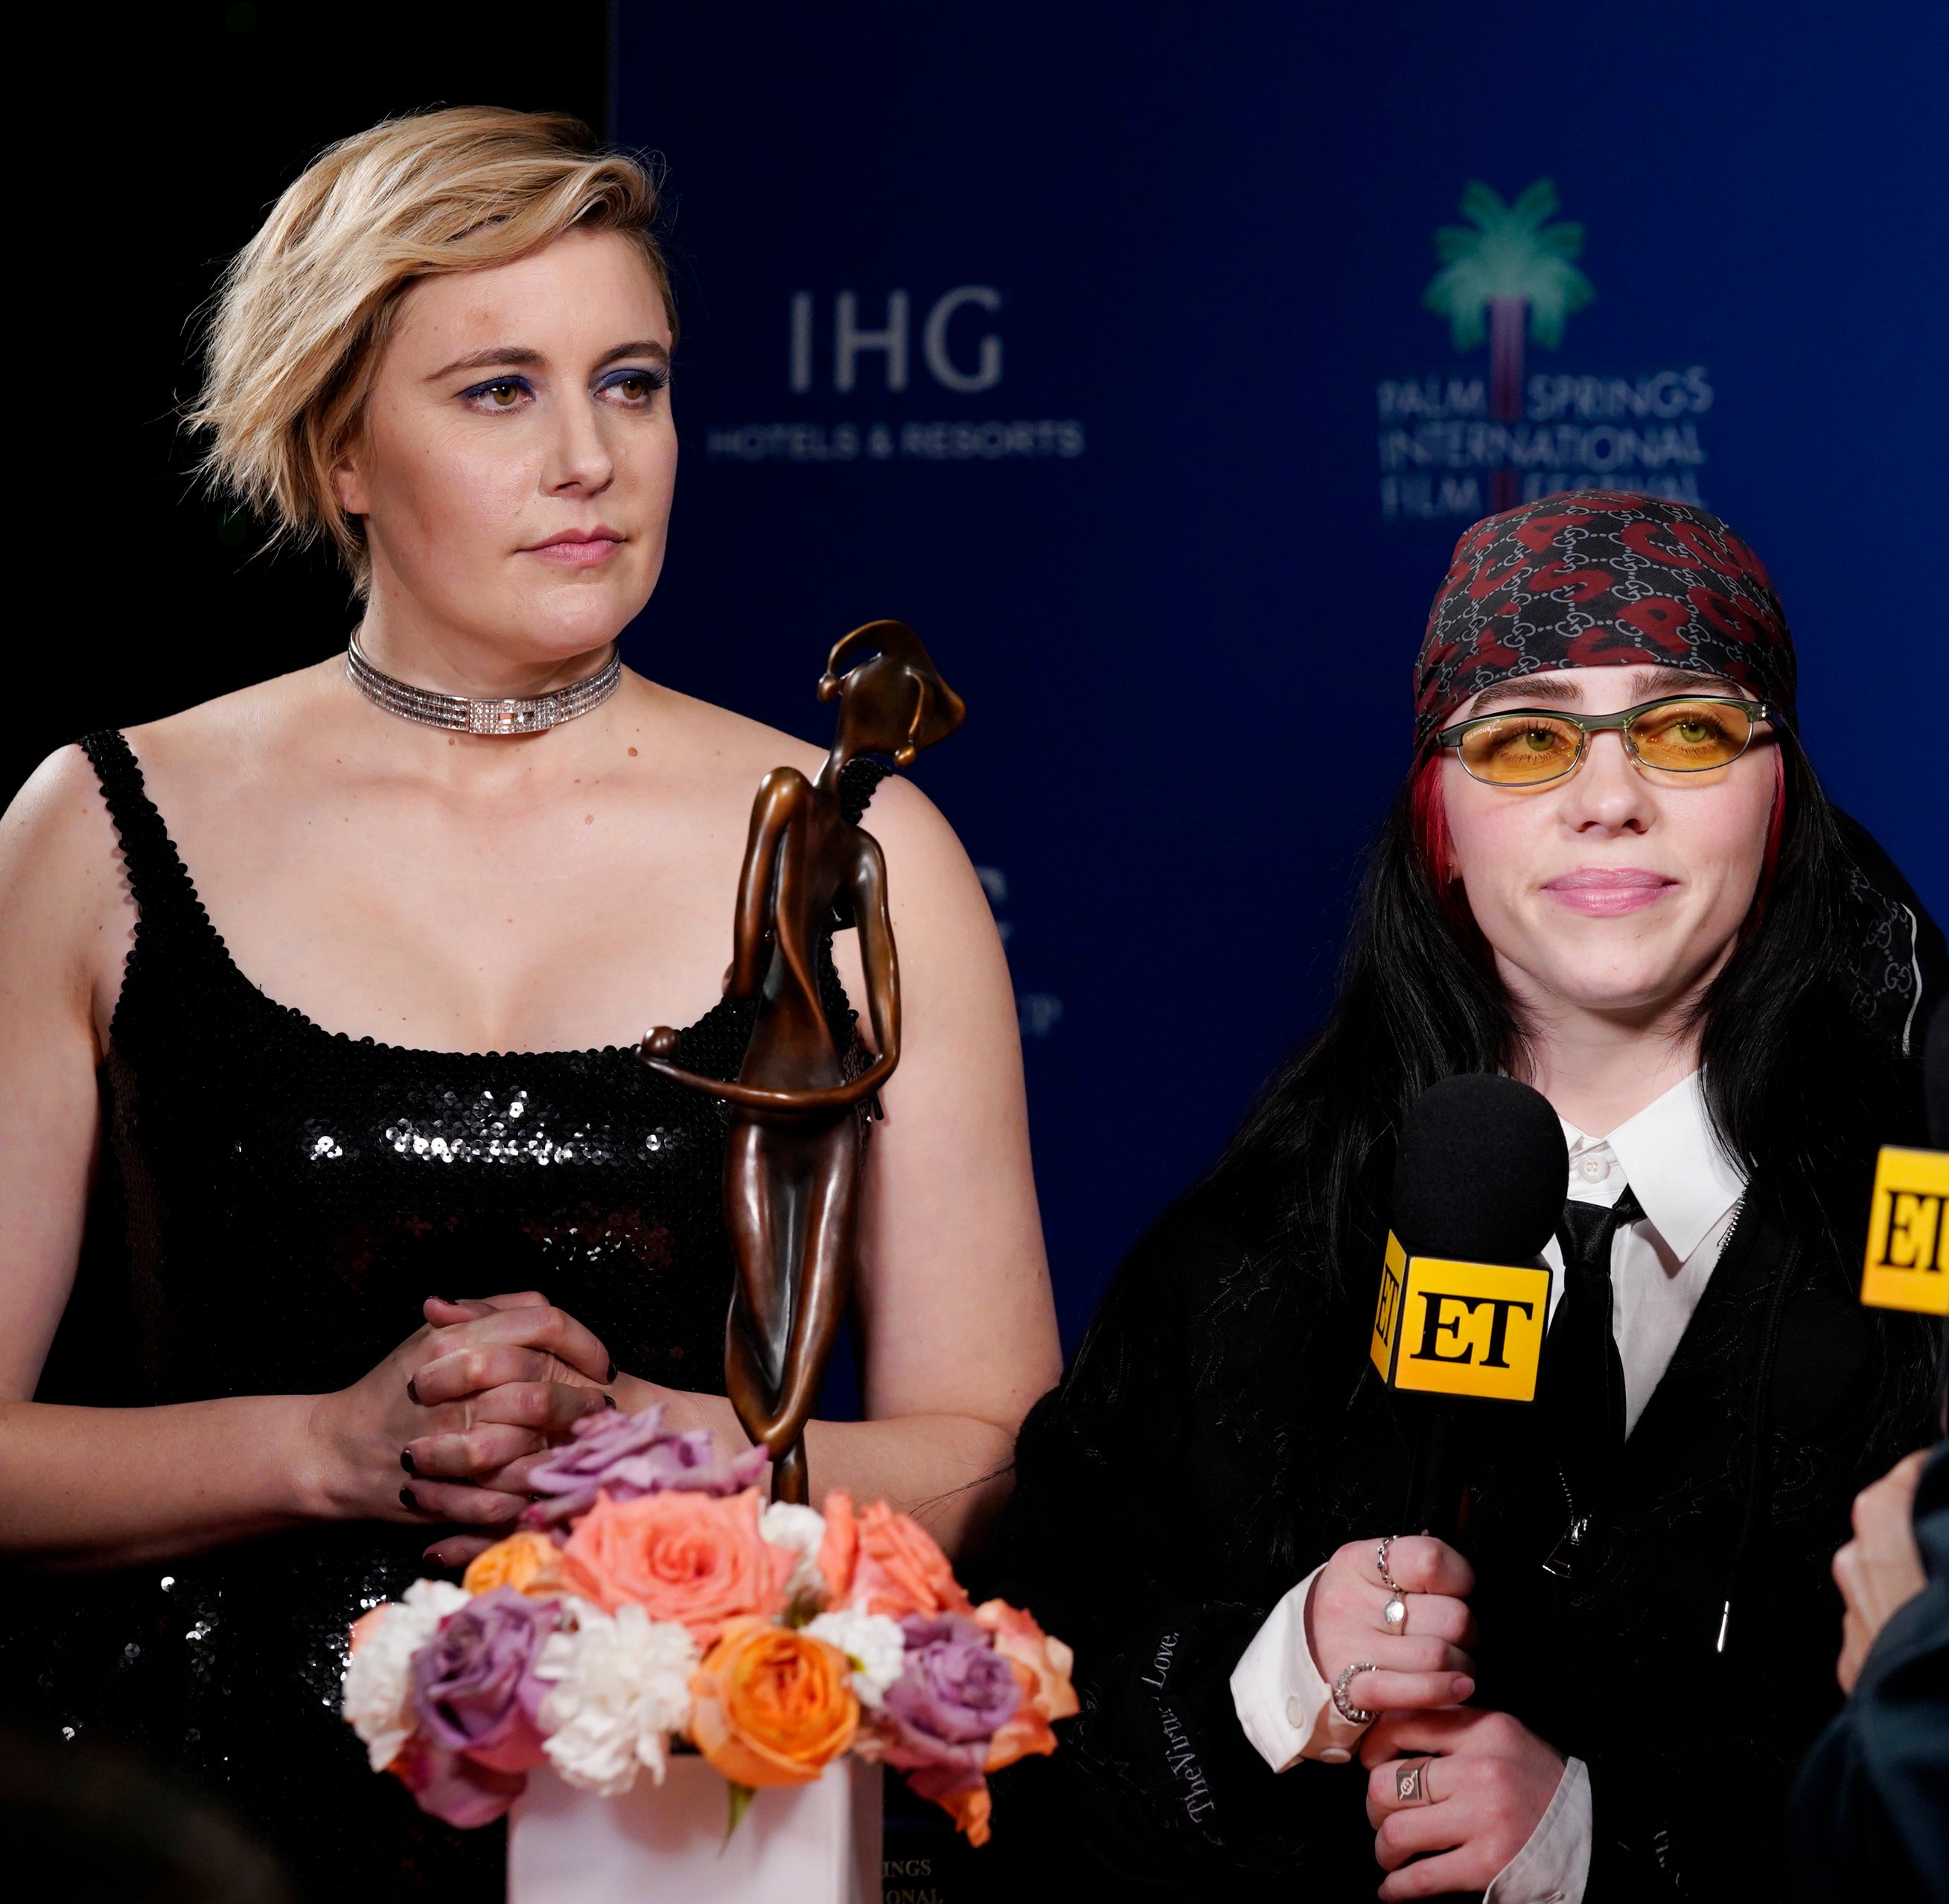 Greta and Billie at a media event being interviewed